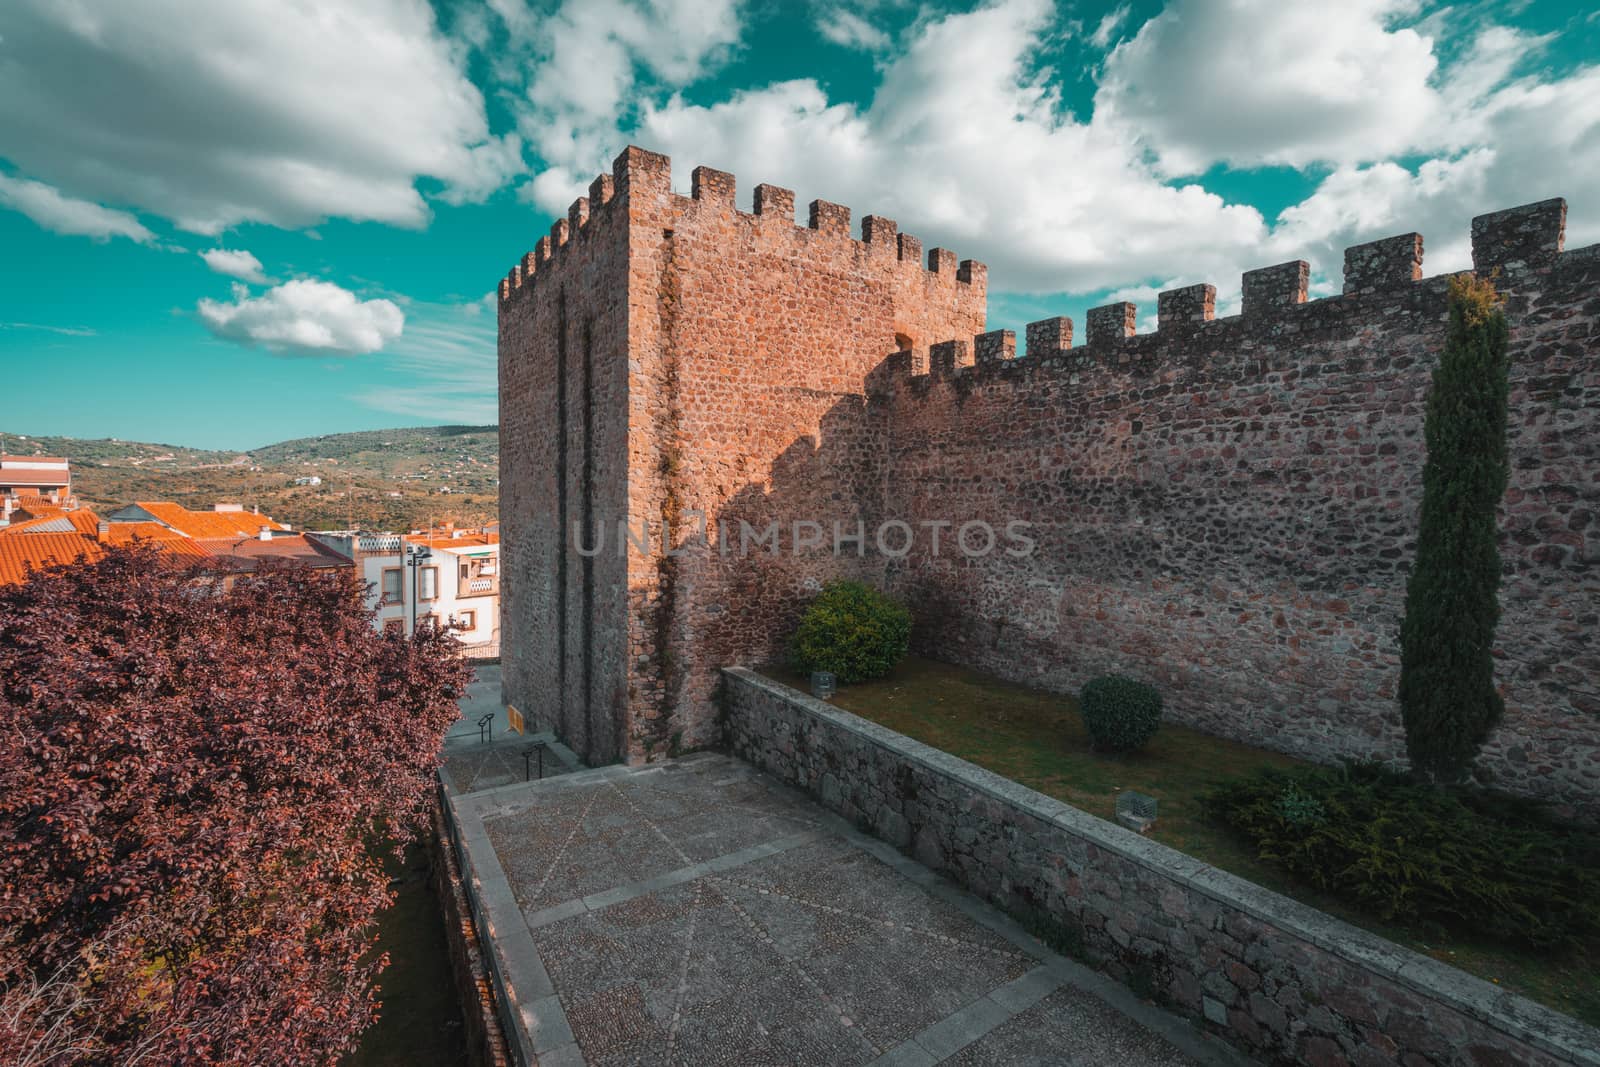 Torre Lucia defensive tower and medieval walls of Plasencia, walled market city in the province of Caceres, Spain. Teal and orange style